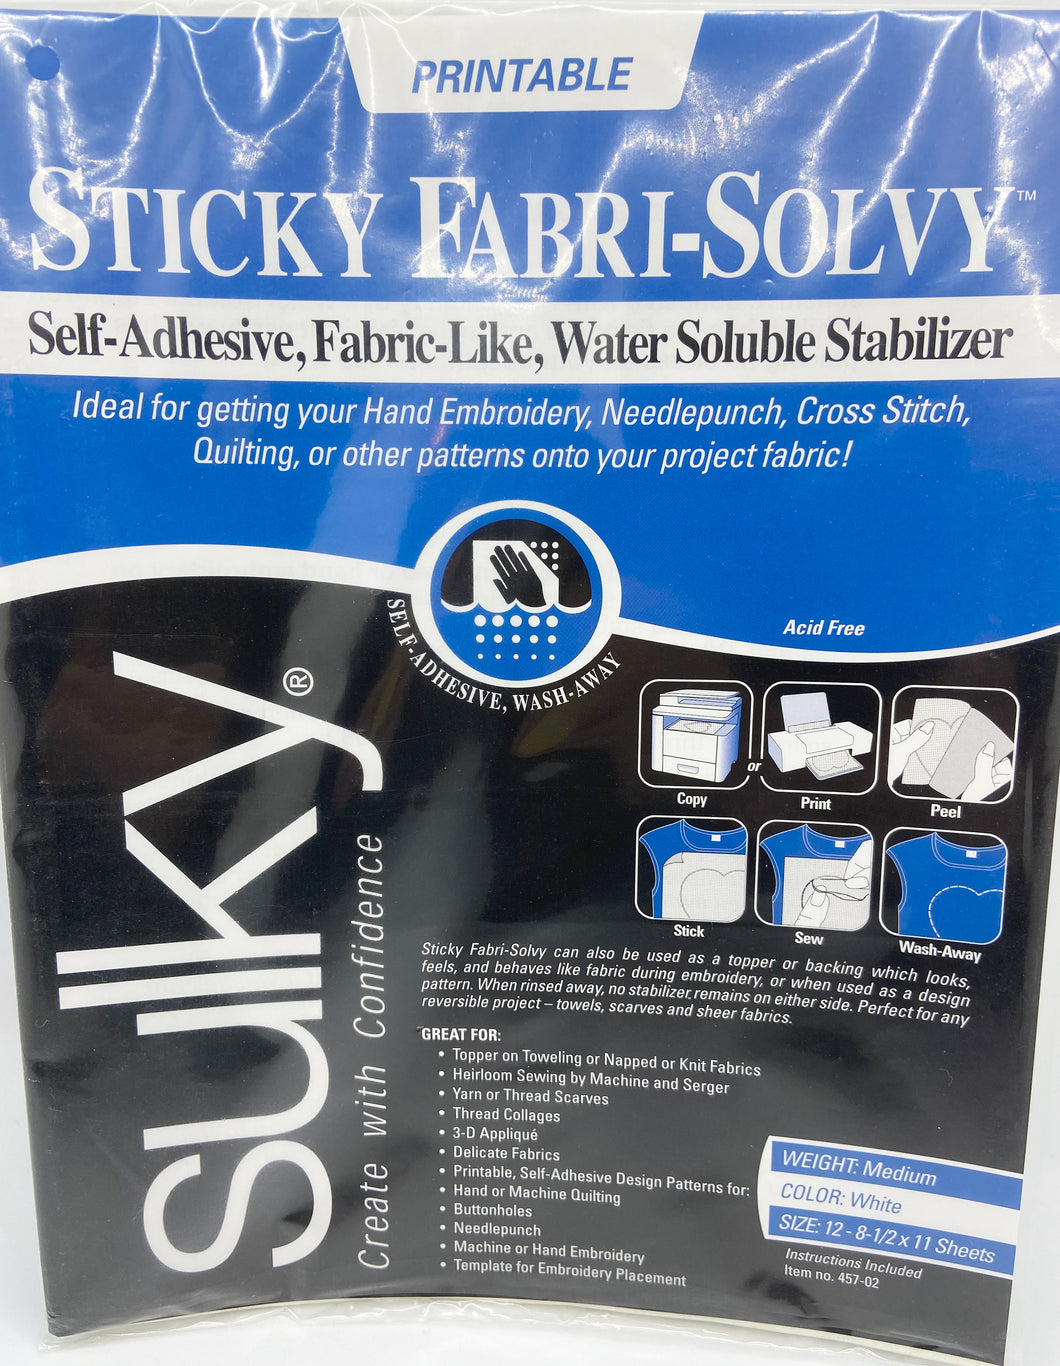 Using Sticky Fabri-Solvy for Hand Embroidery 